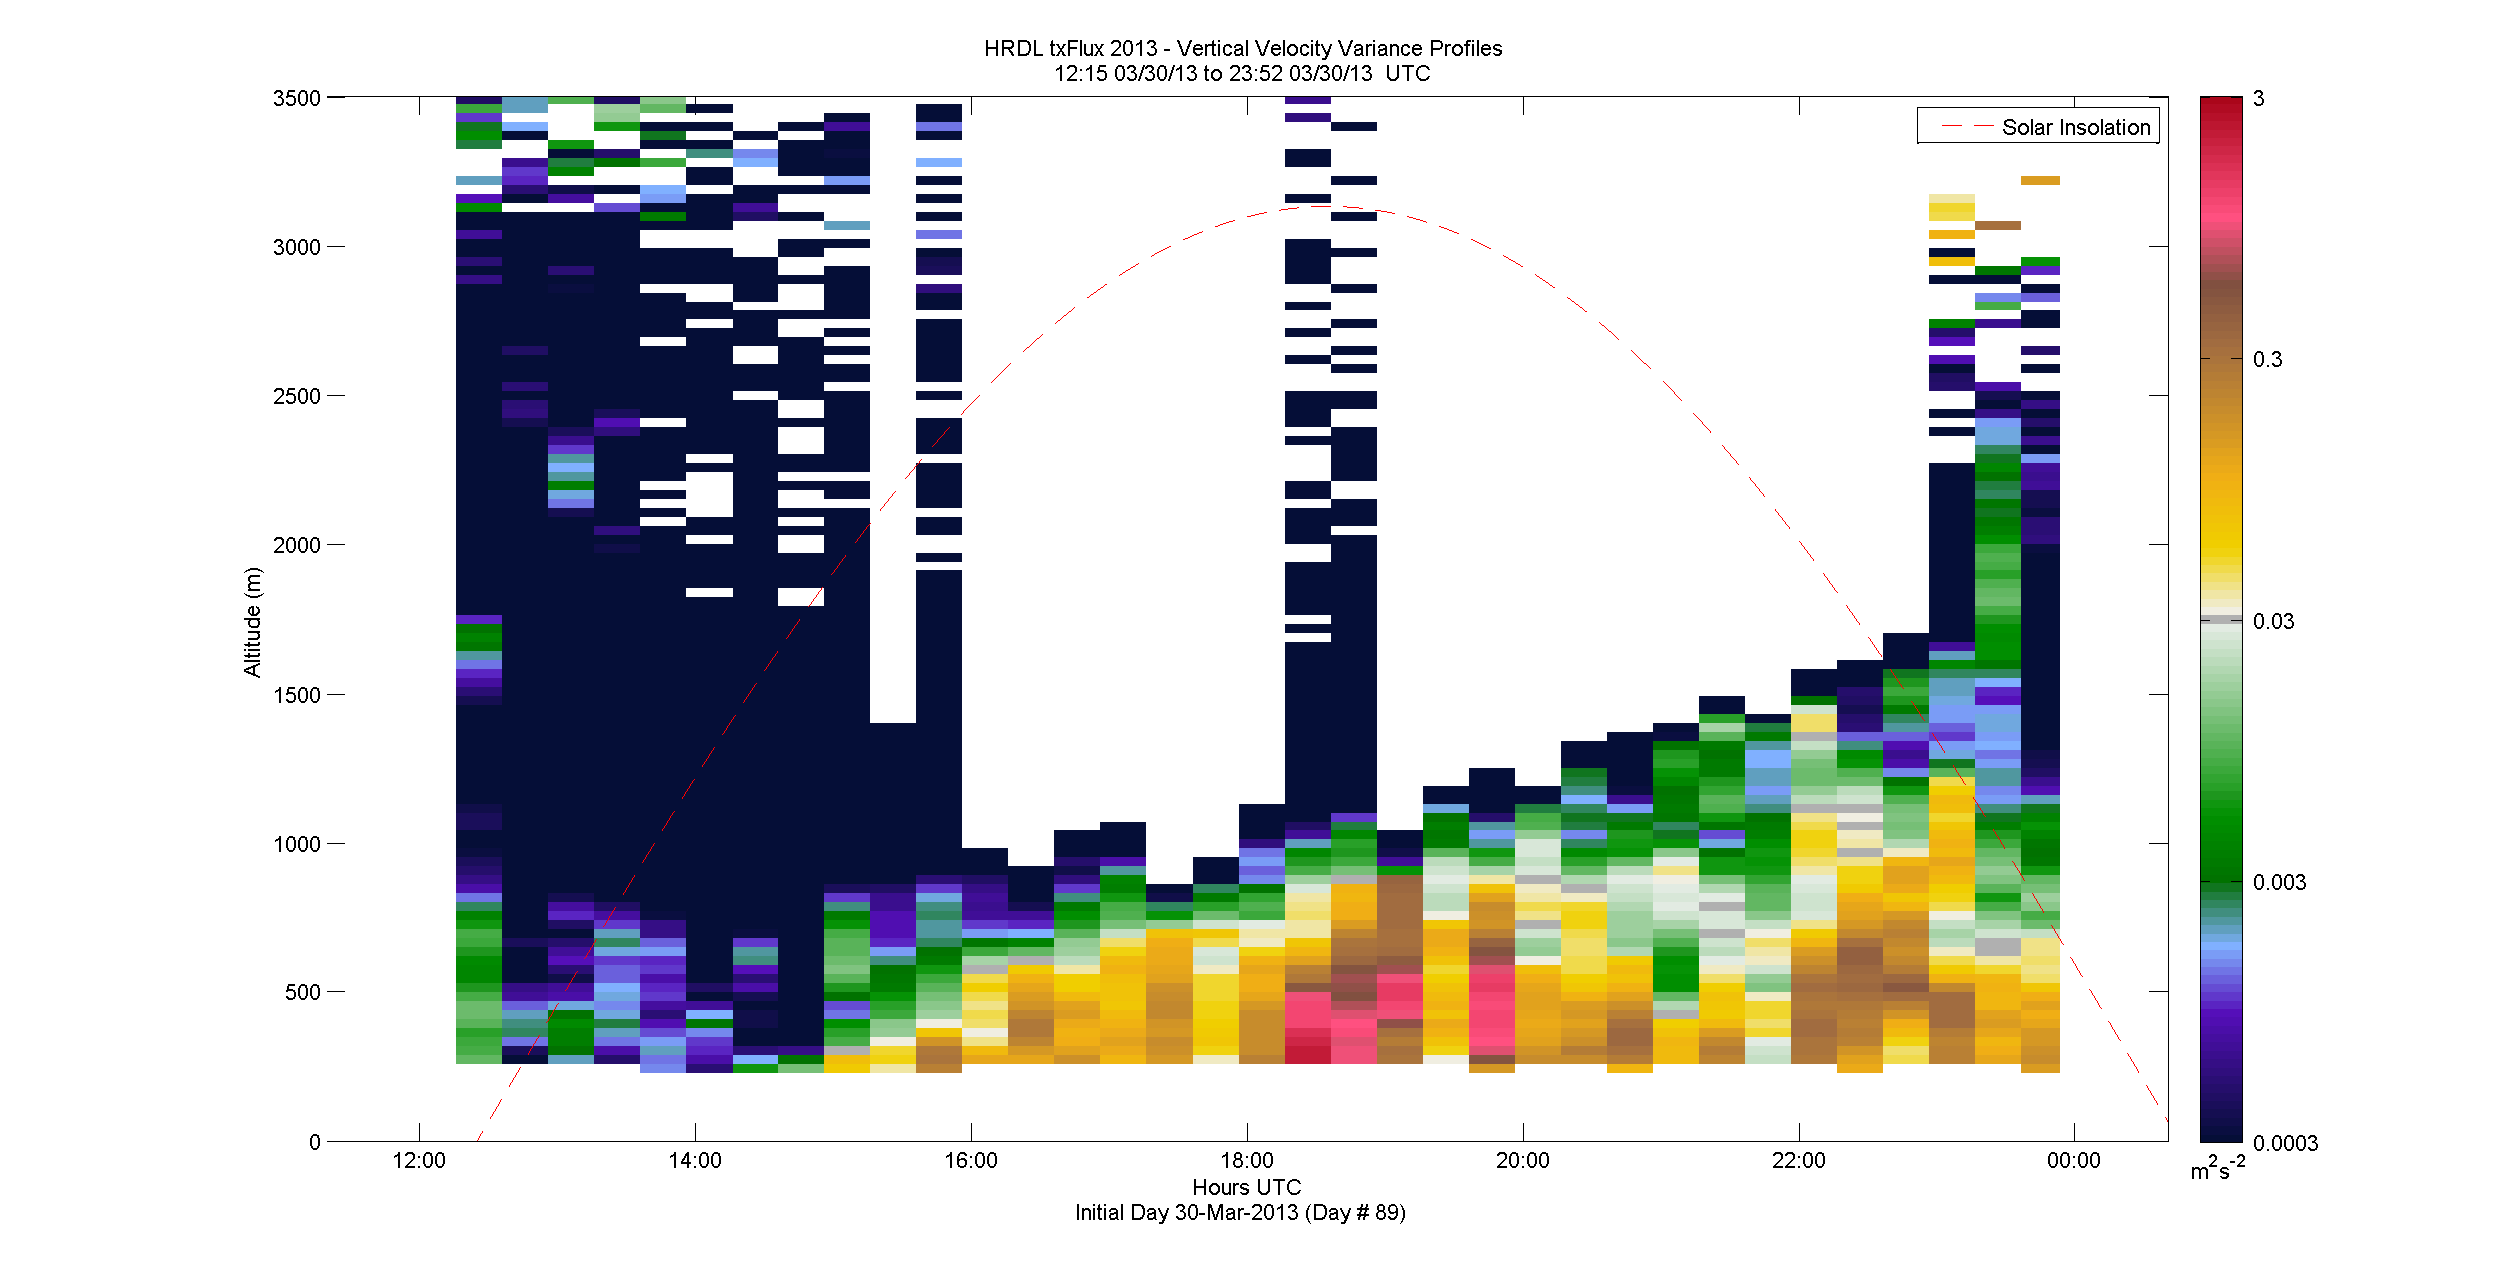 HRDL vertical variance profile - March 30 pm